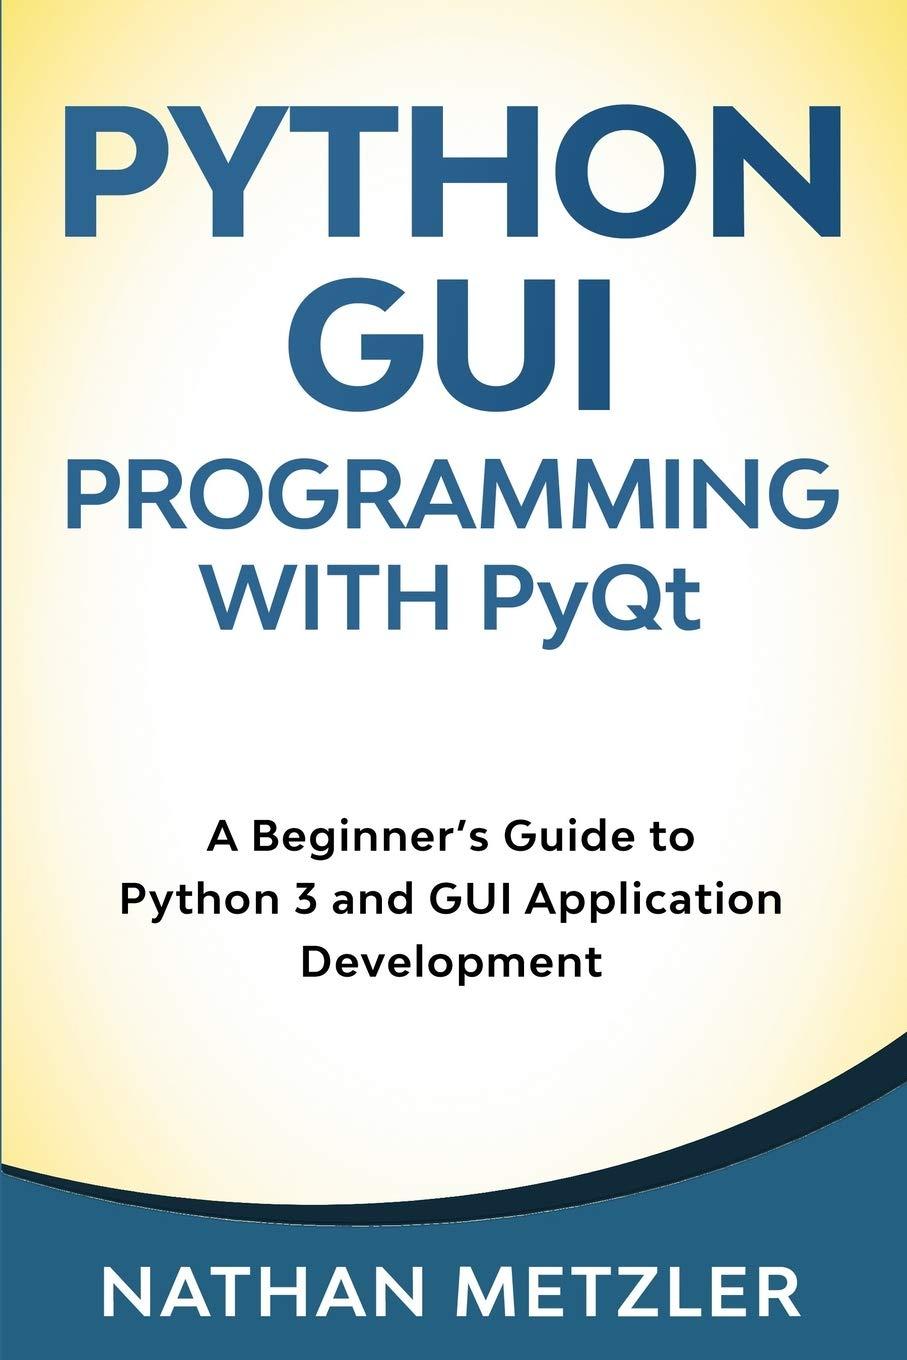 Python GUI Programming With PyQt A Beginner’s Guide To Python 3 And GUI Application Development